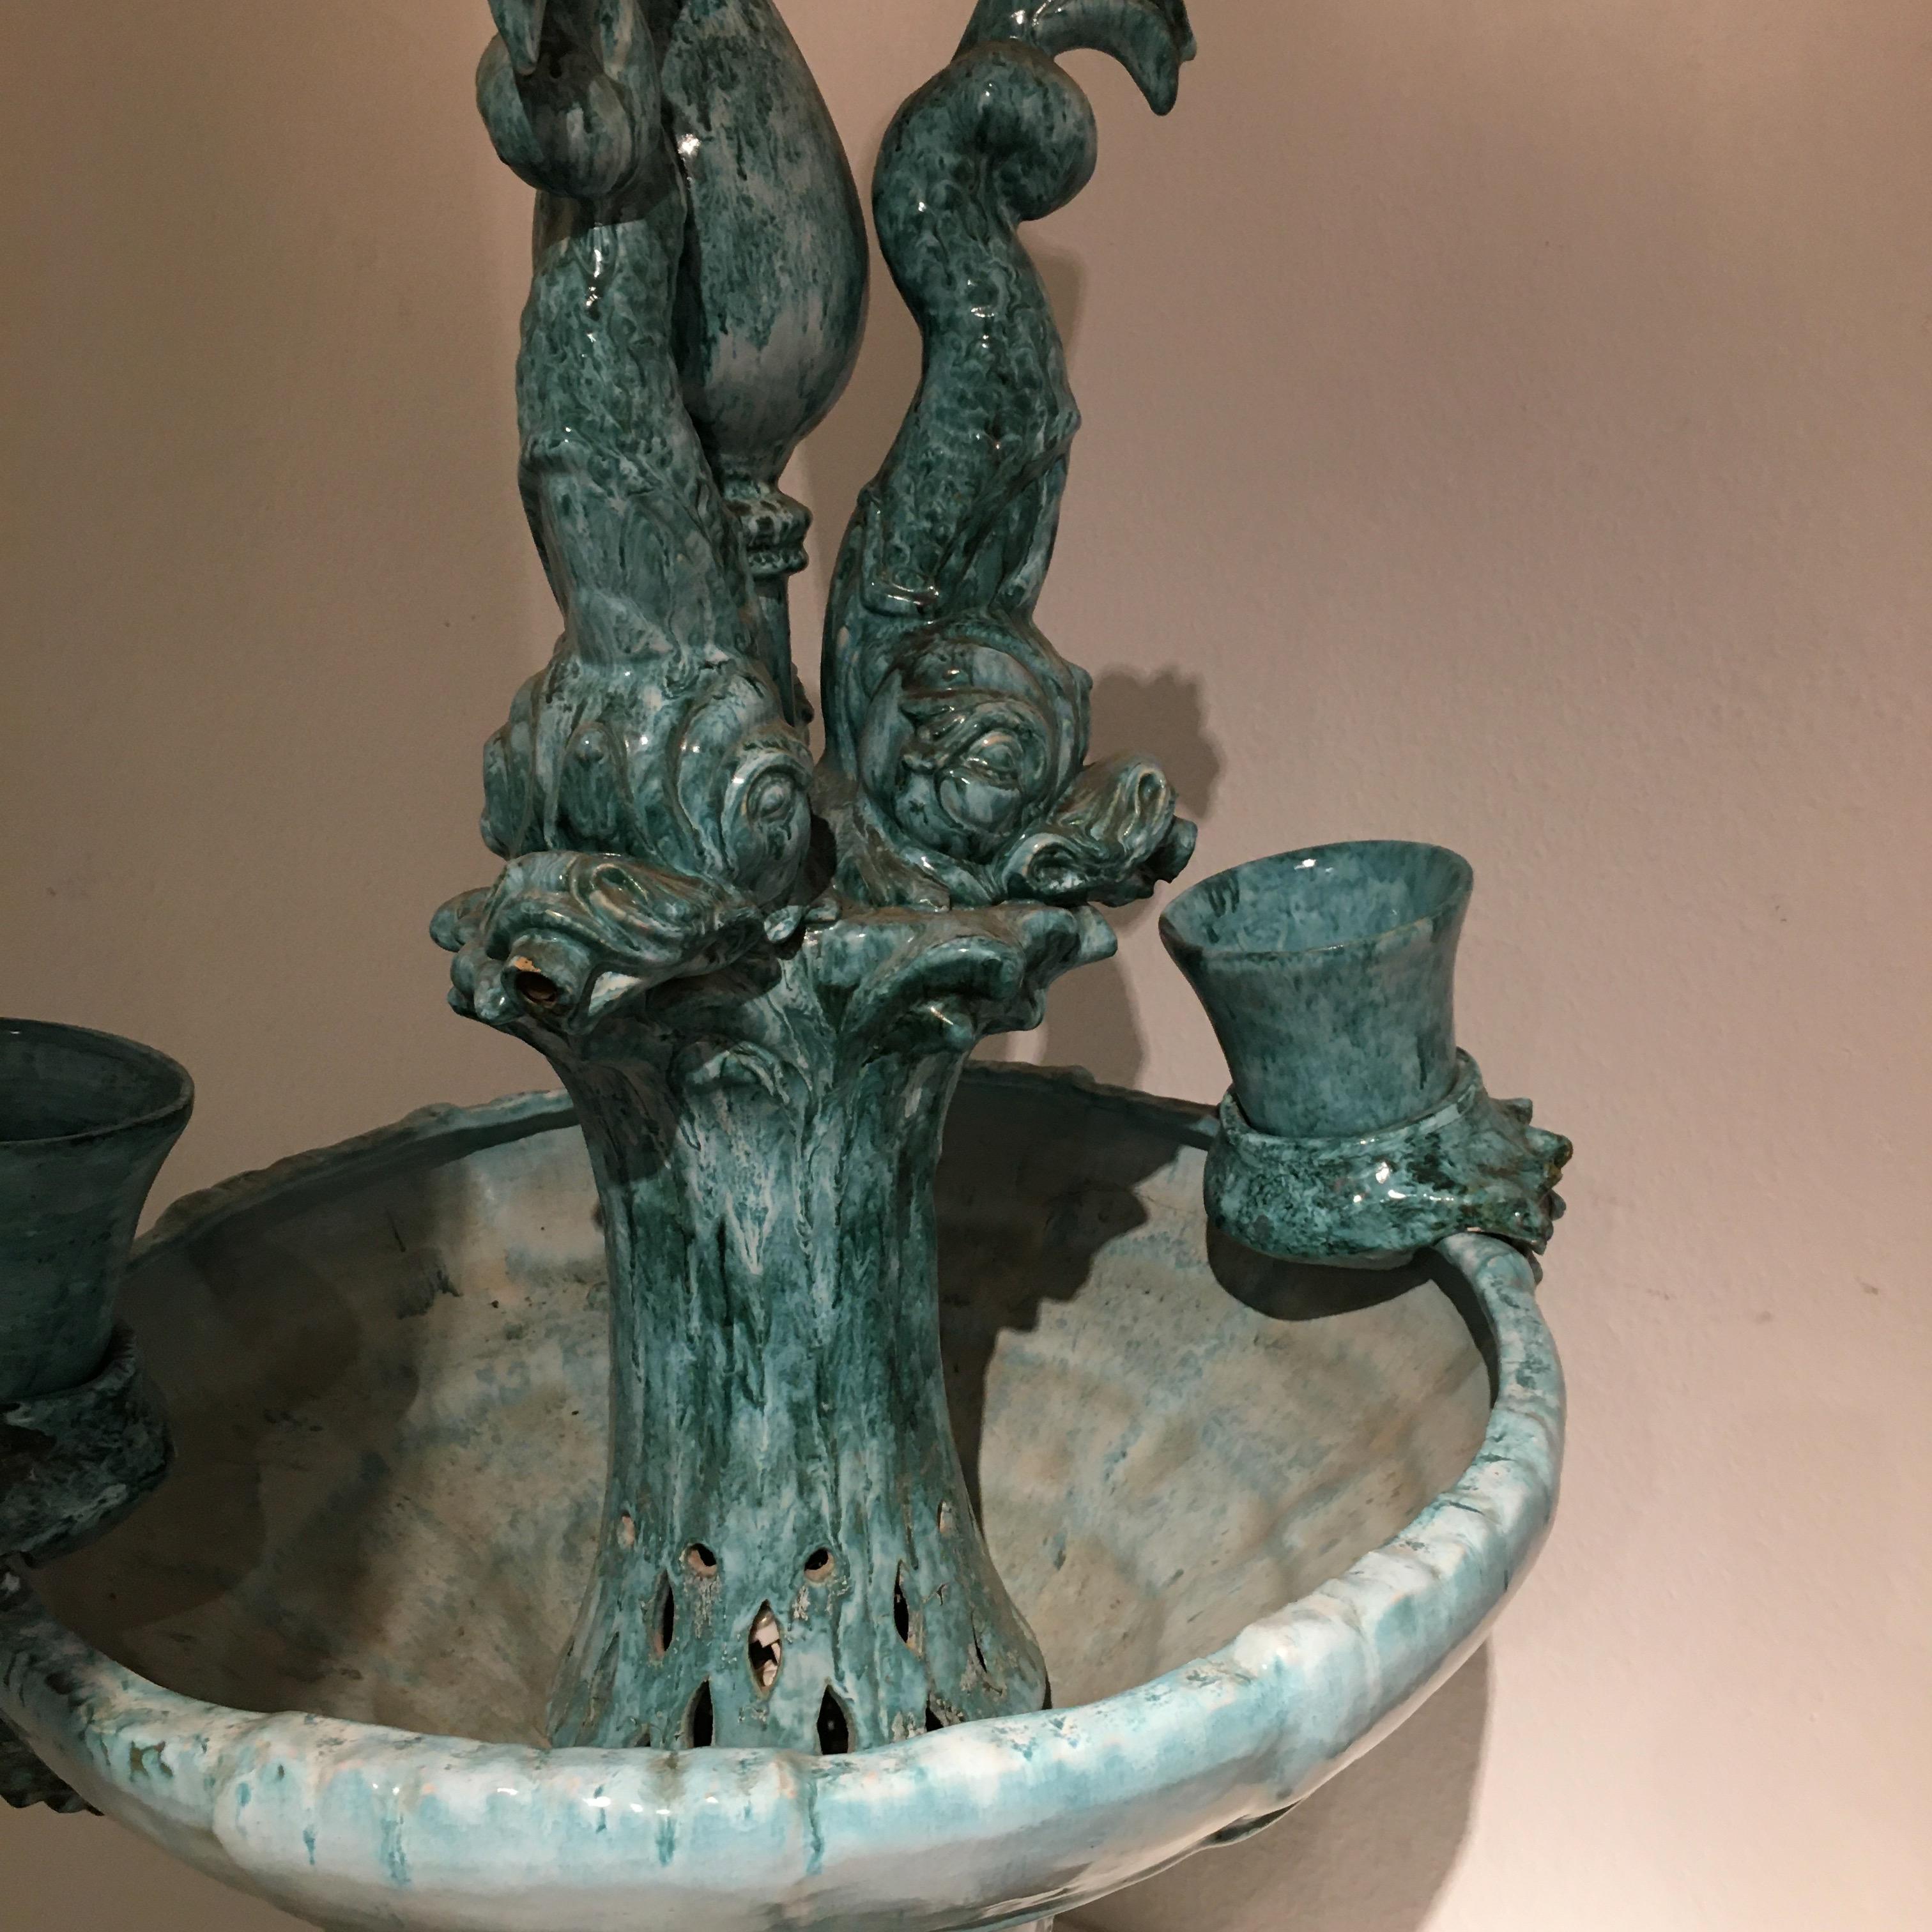 Large ceramic enlightening fountain from Vallauris France.
The foot base, basin, dolphins and the lanterna on top comes in 4 separates pieces.
Water comes out of the mouth of the dolphins in a close circuit.
Vallauris, France, circa 1950.